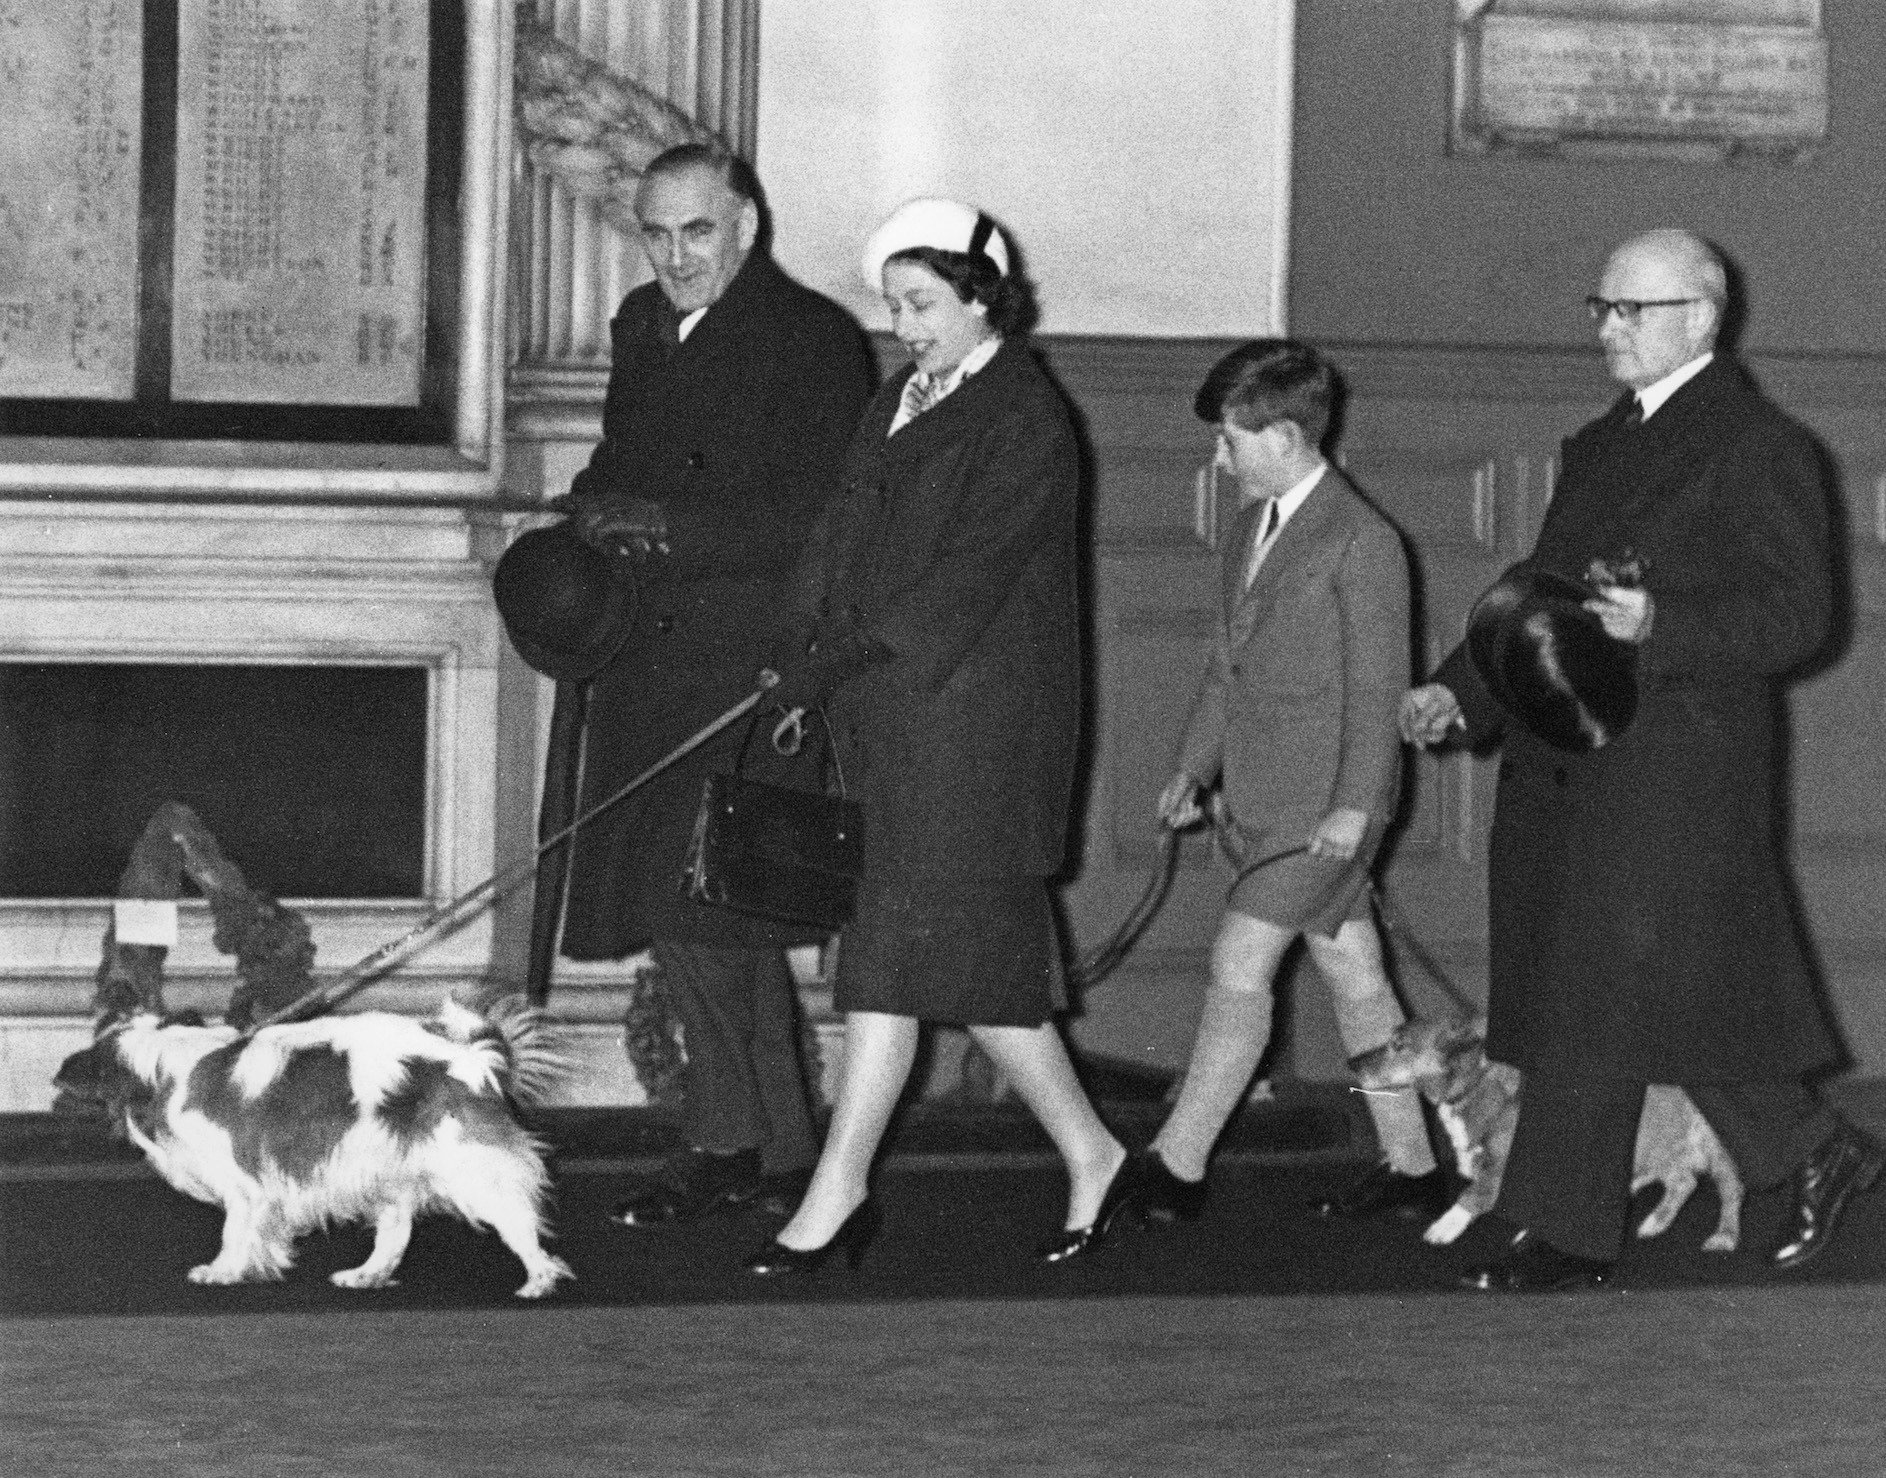 Queen Elizabeth II and Prince Charles walk through Liverpool Street Station in London with their dogs